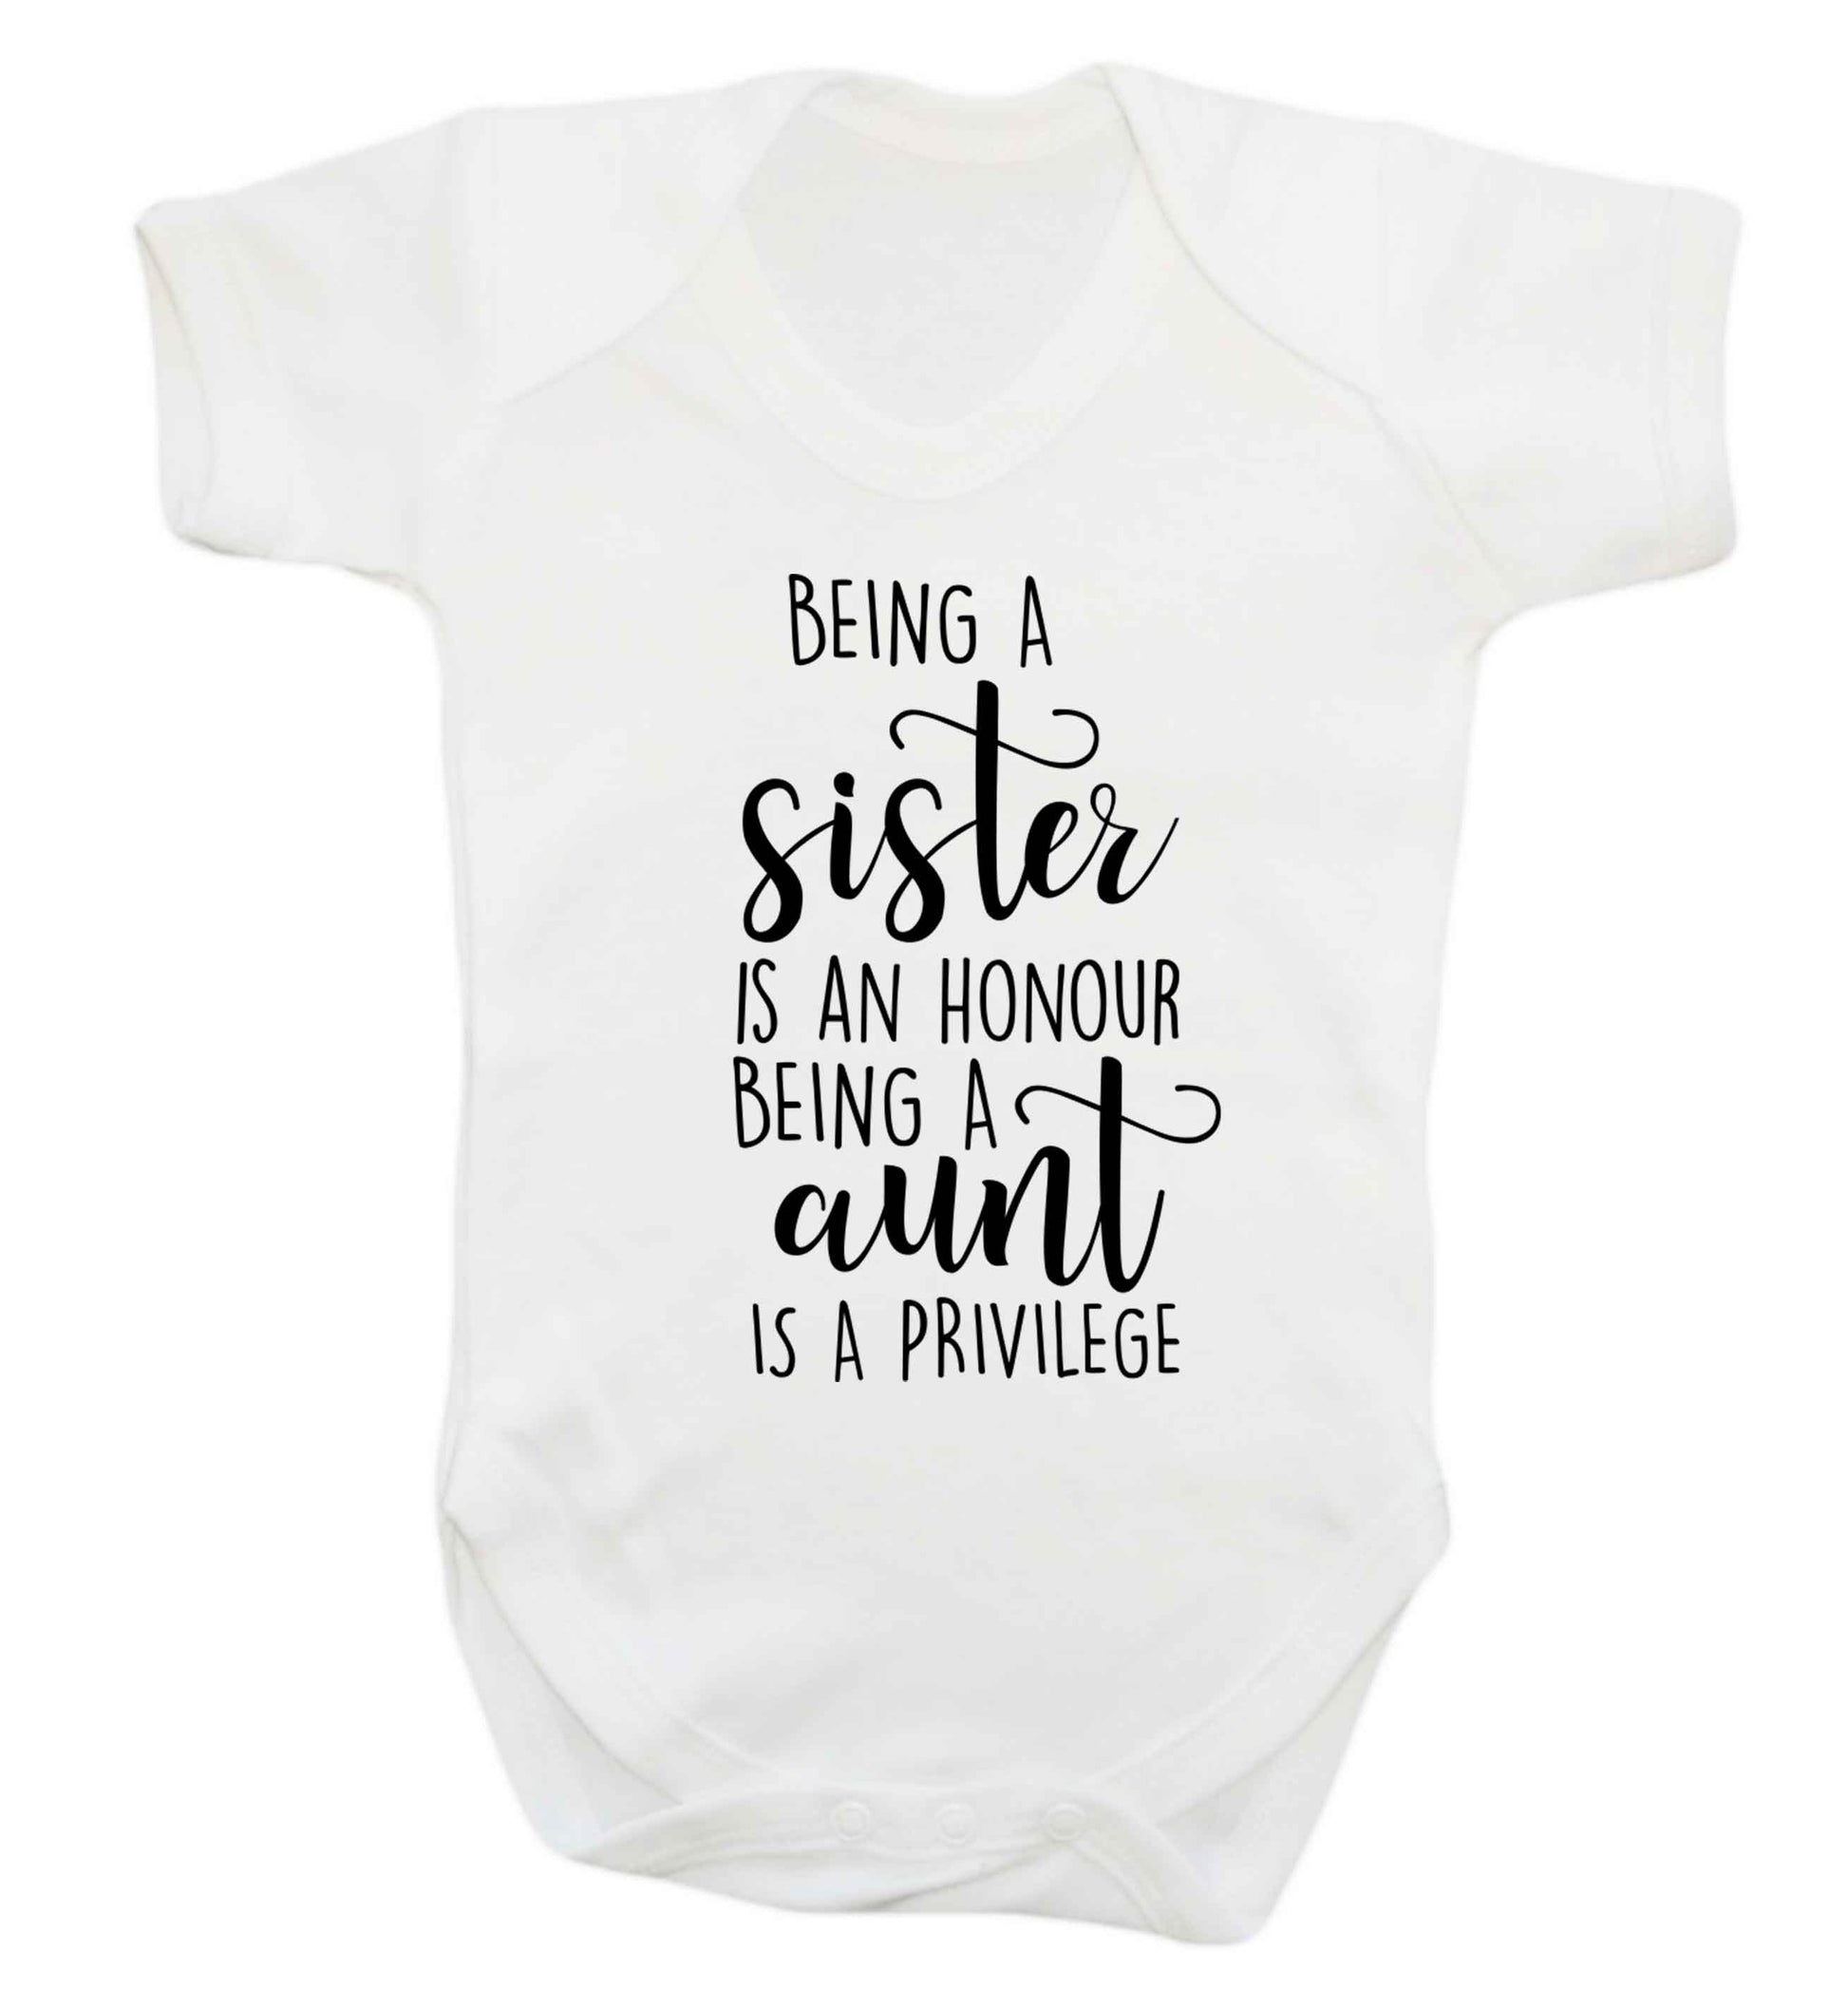 Being a sister is an honour being an auntie is a privilege Baby Vest white 18-24 months